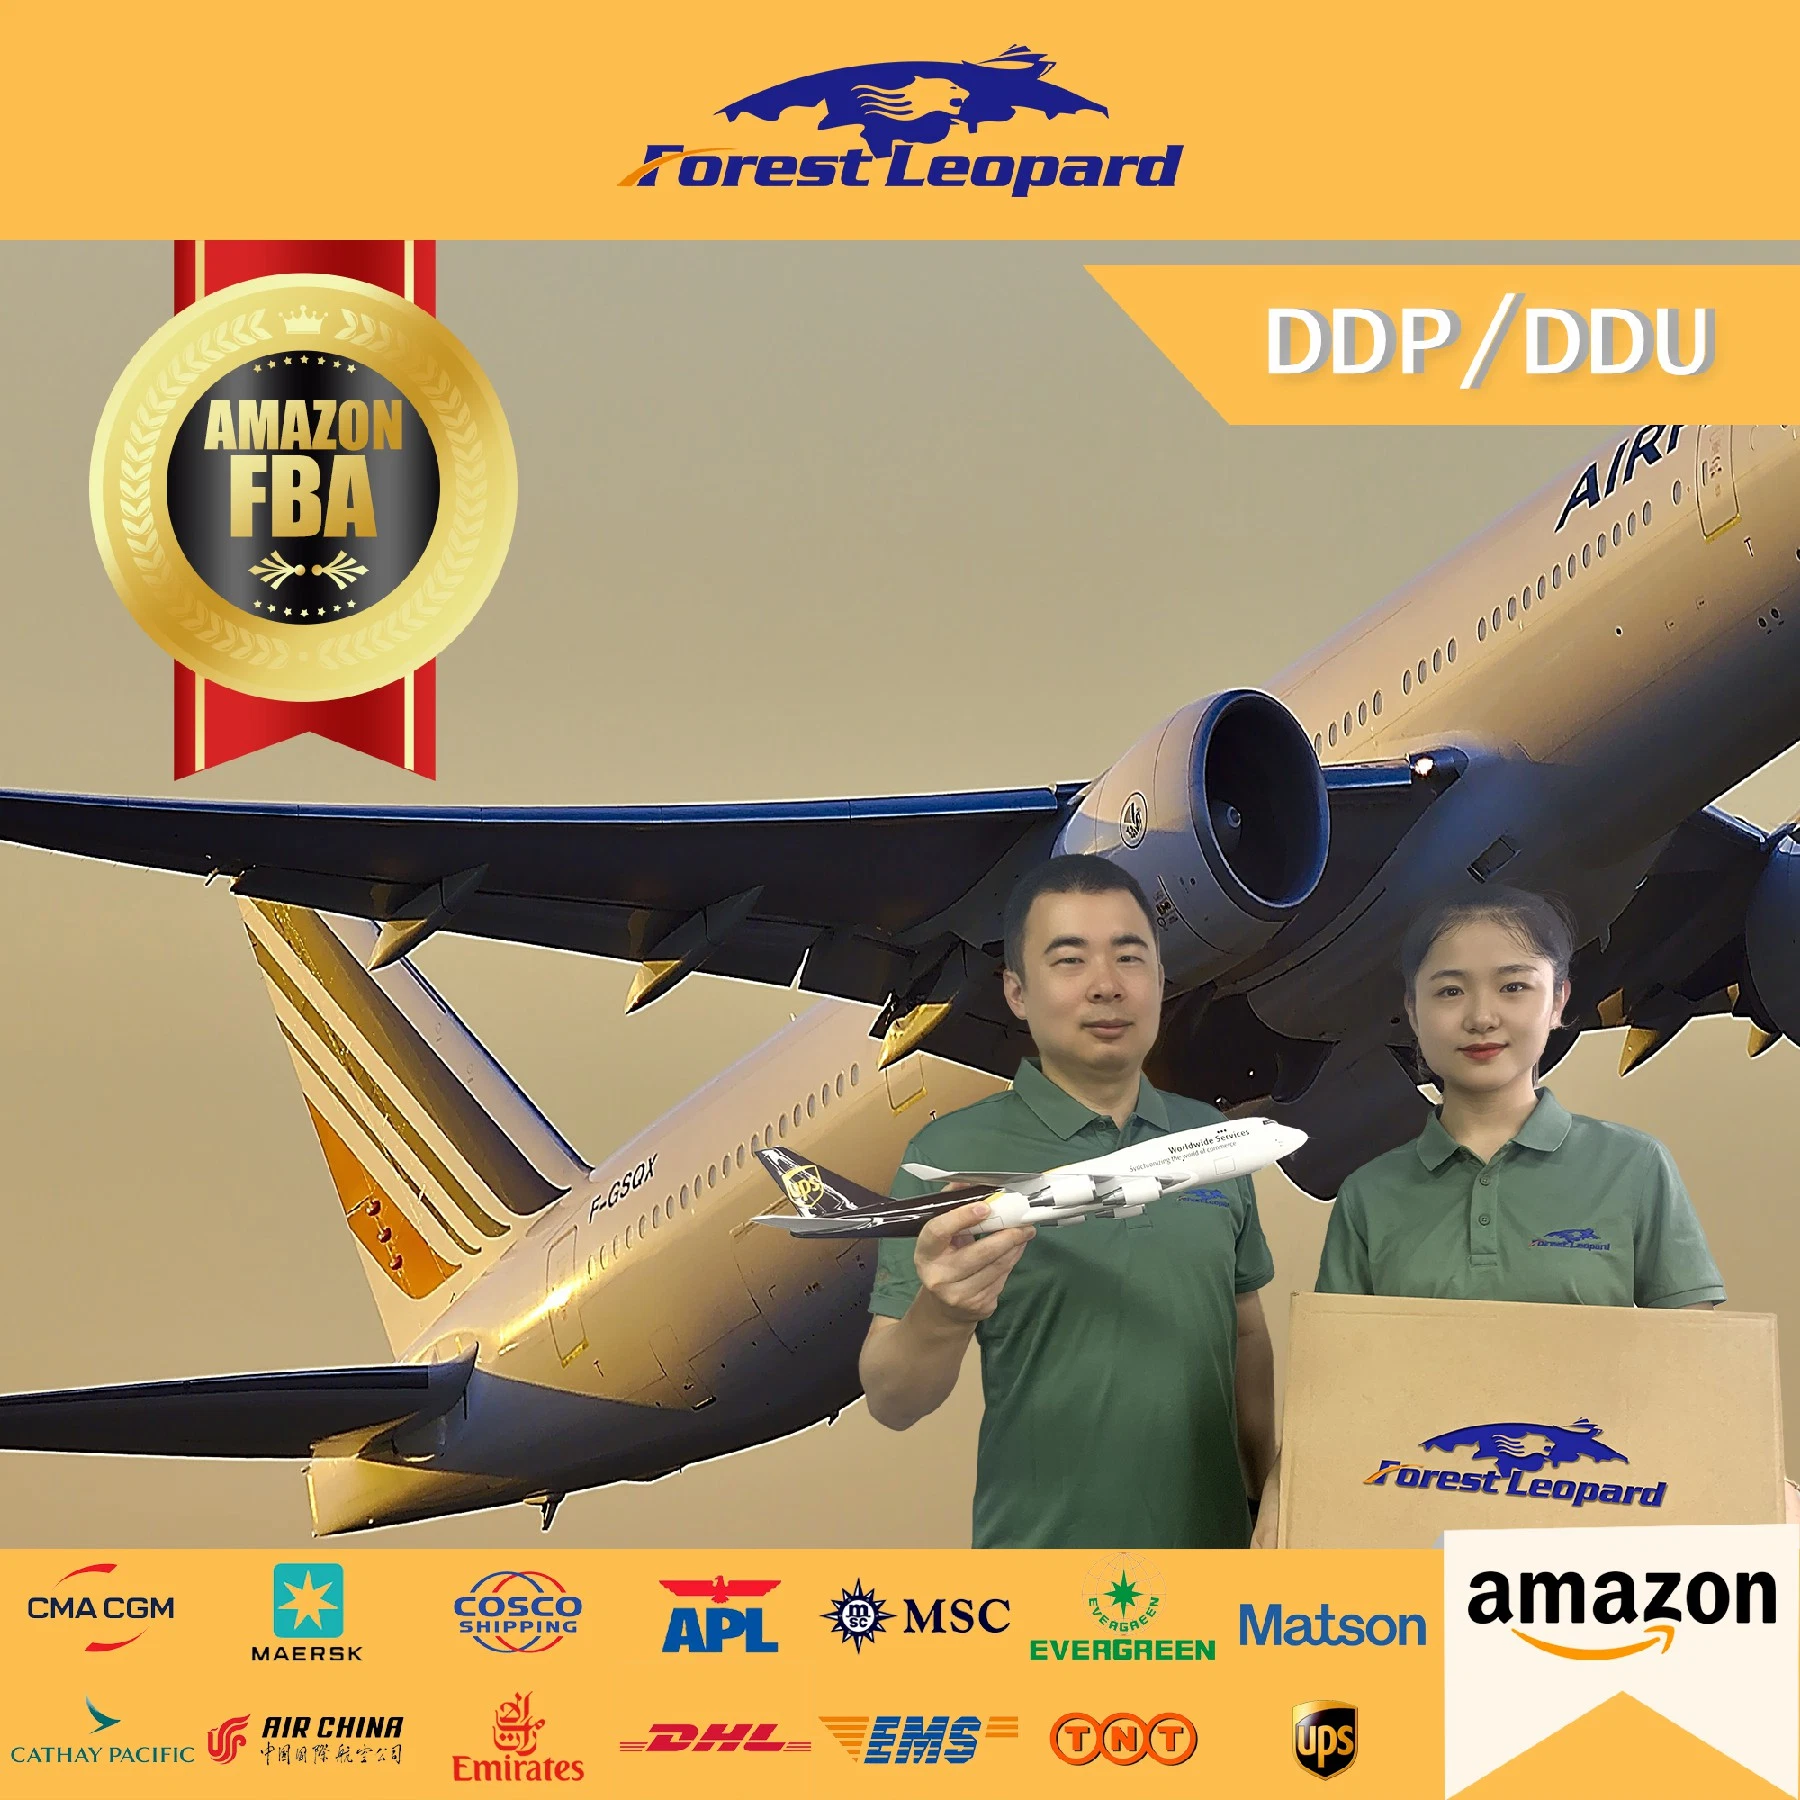 Convenient and Efficient DDP Air Shipping Service From China to Belgium Amazon Fba Forest Leopard Logistics Fee Storage (15days)